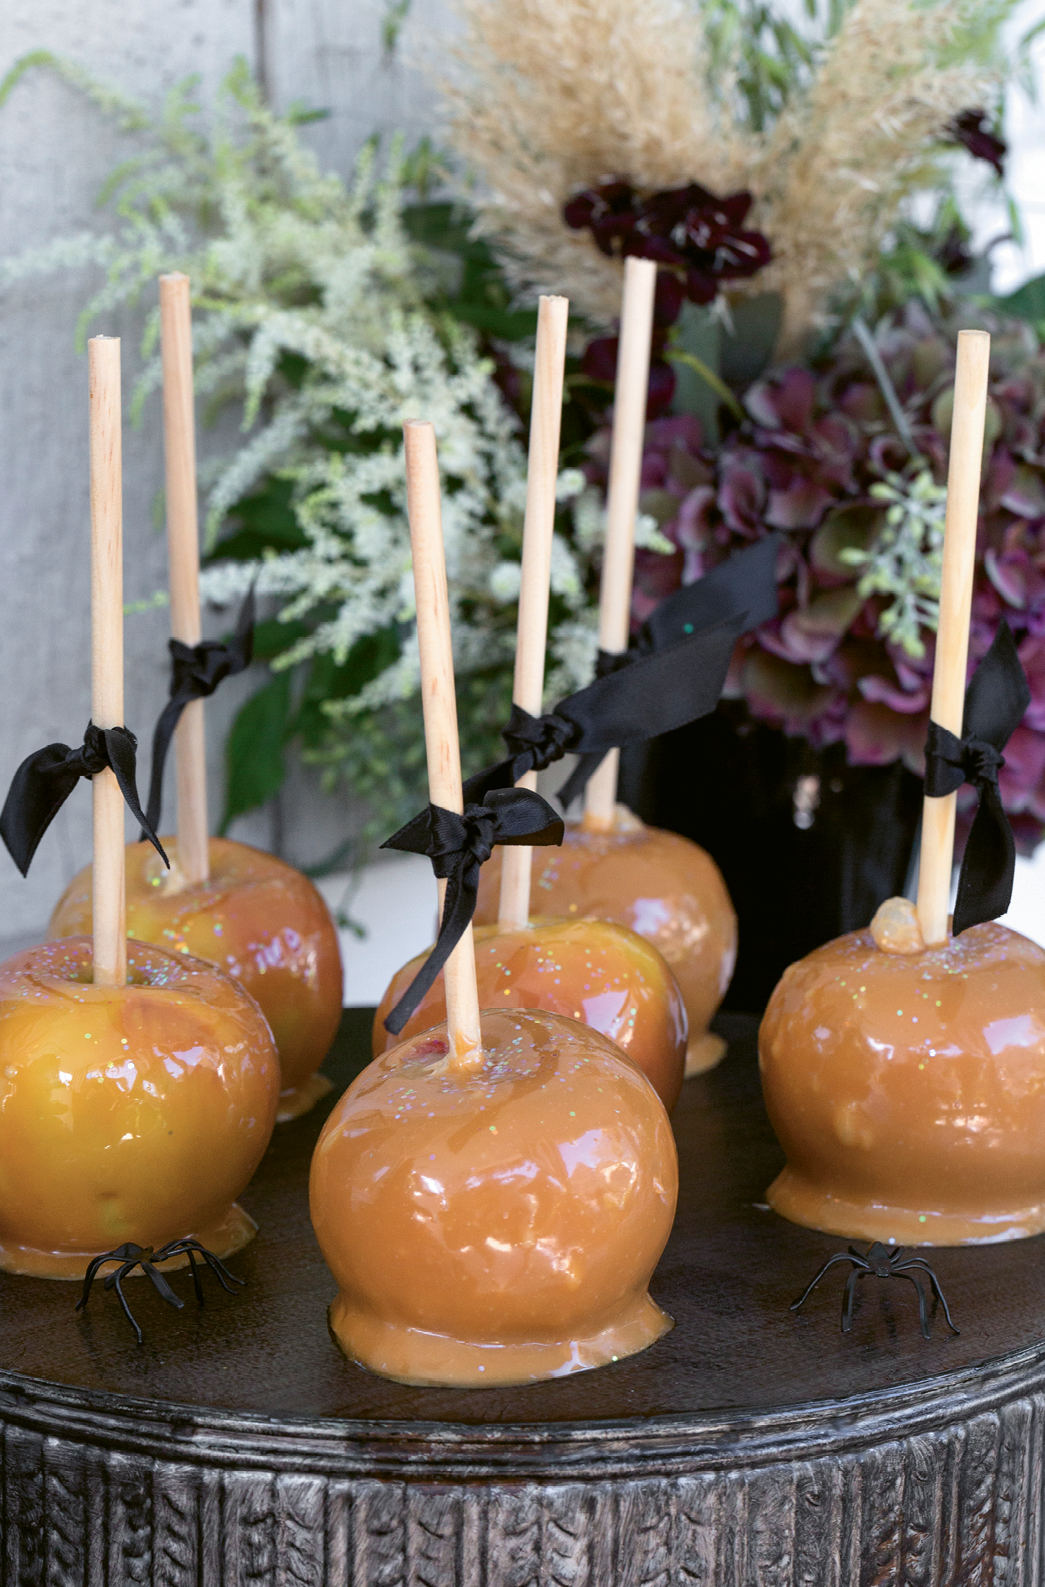 Caramel apples and candy rounded out the sweets.